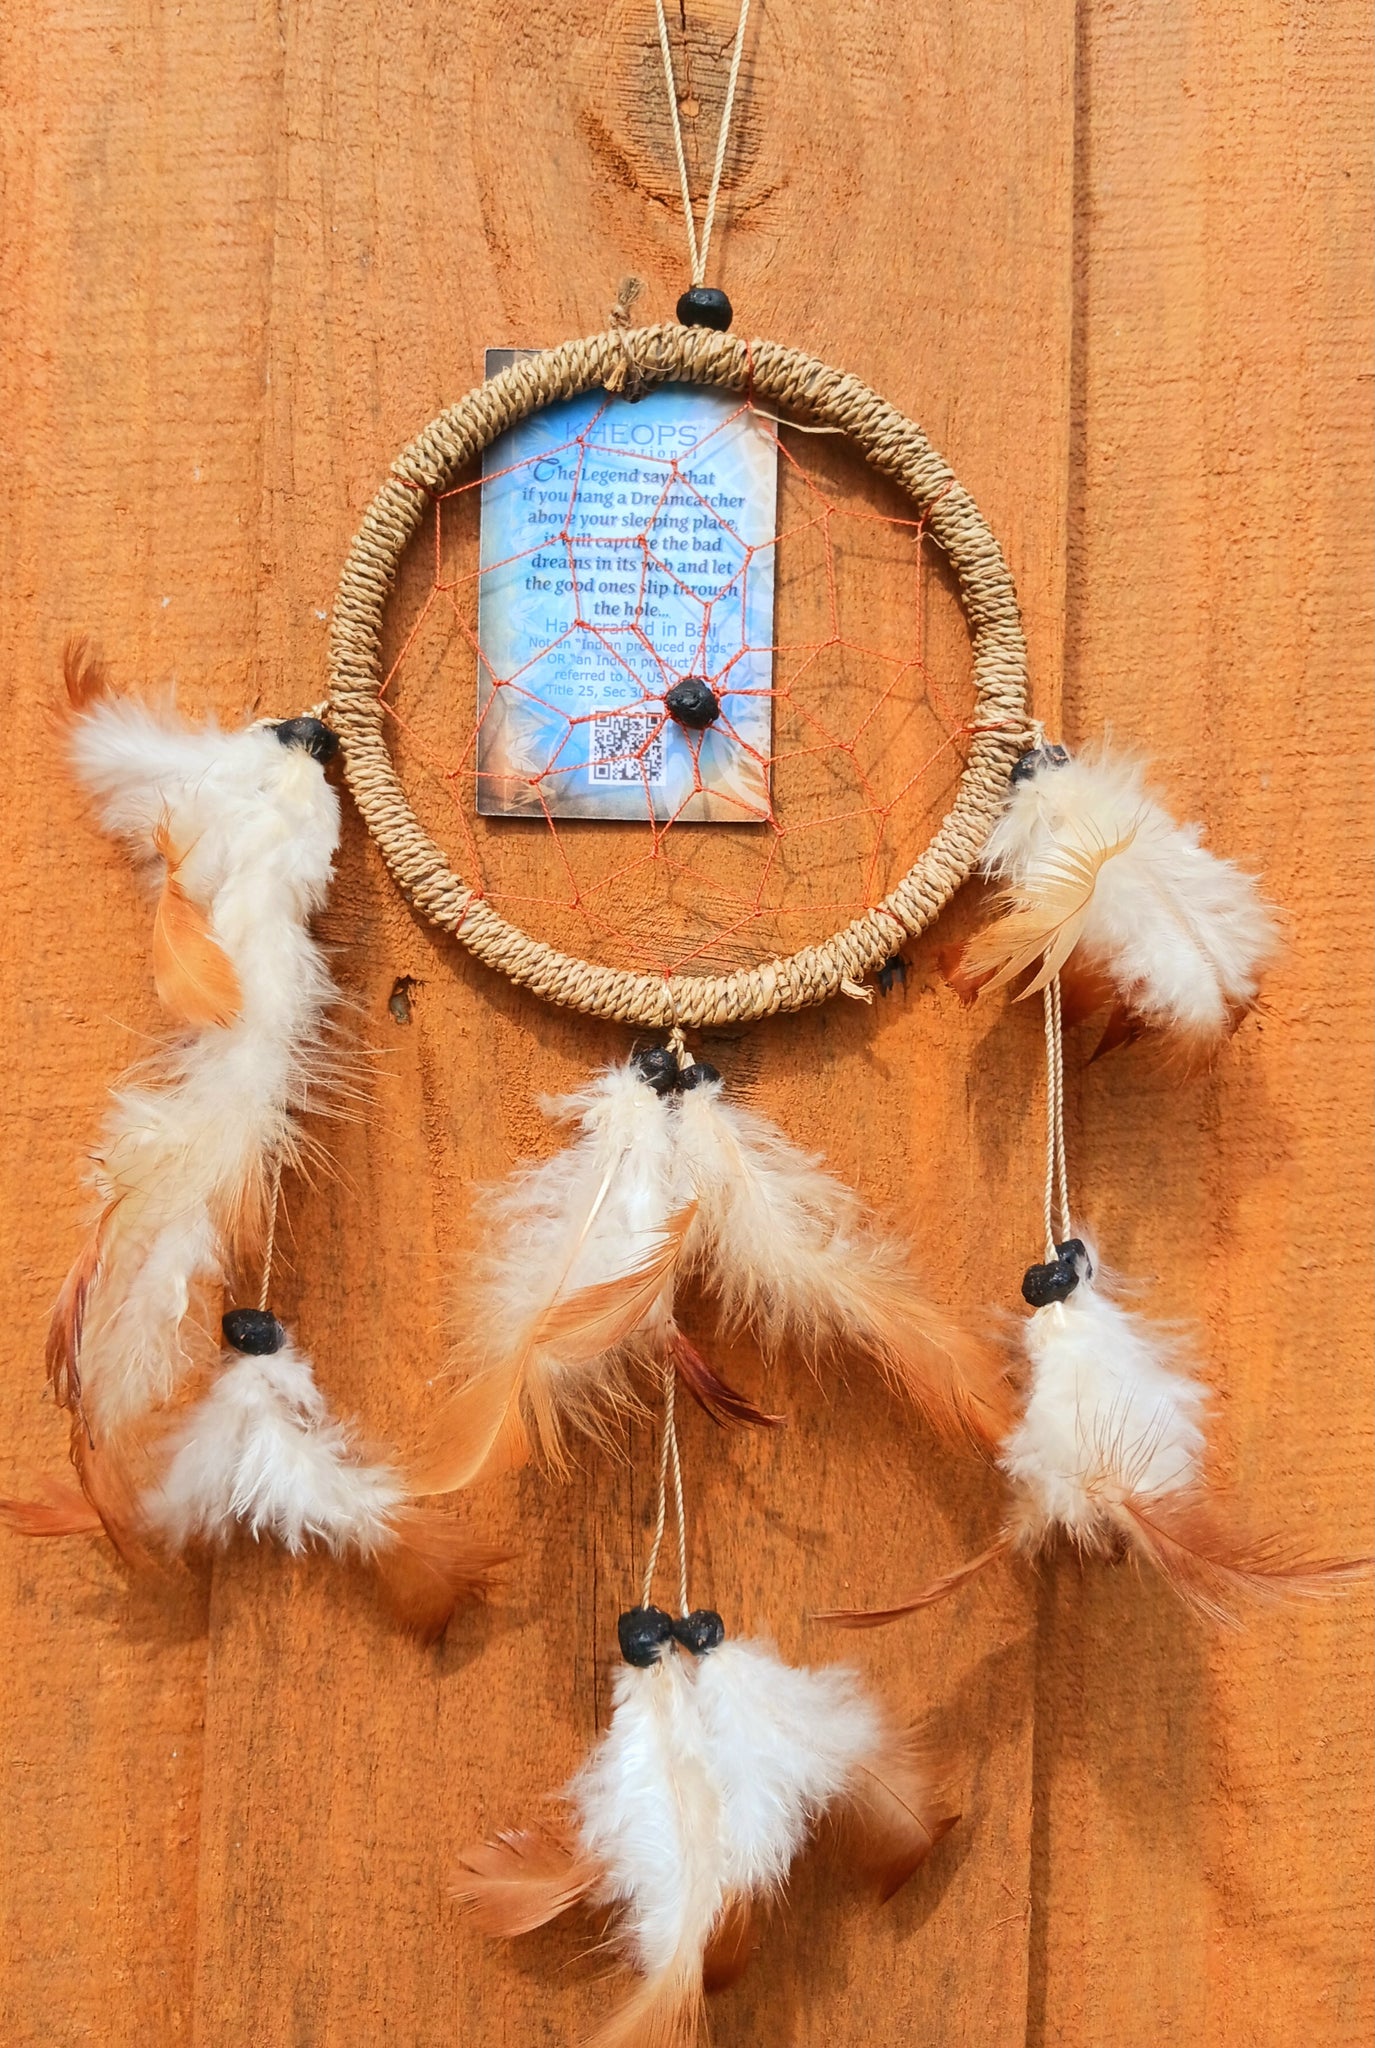 Dreamcatcher Woven Natural Twine with feathers